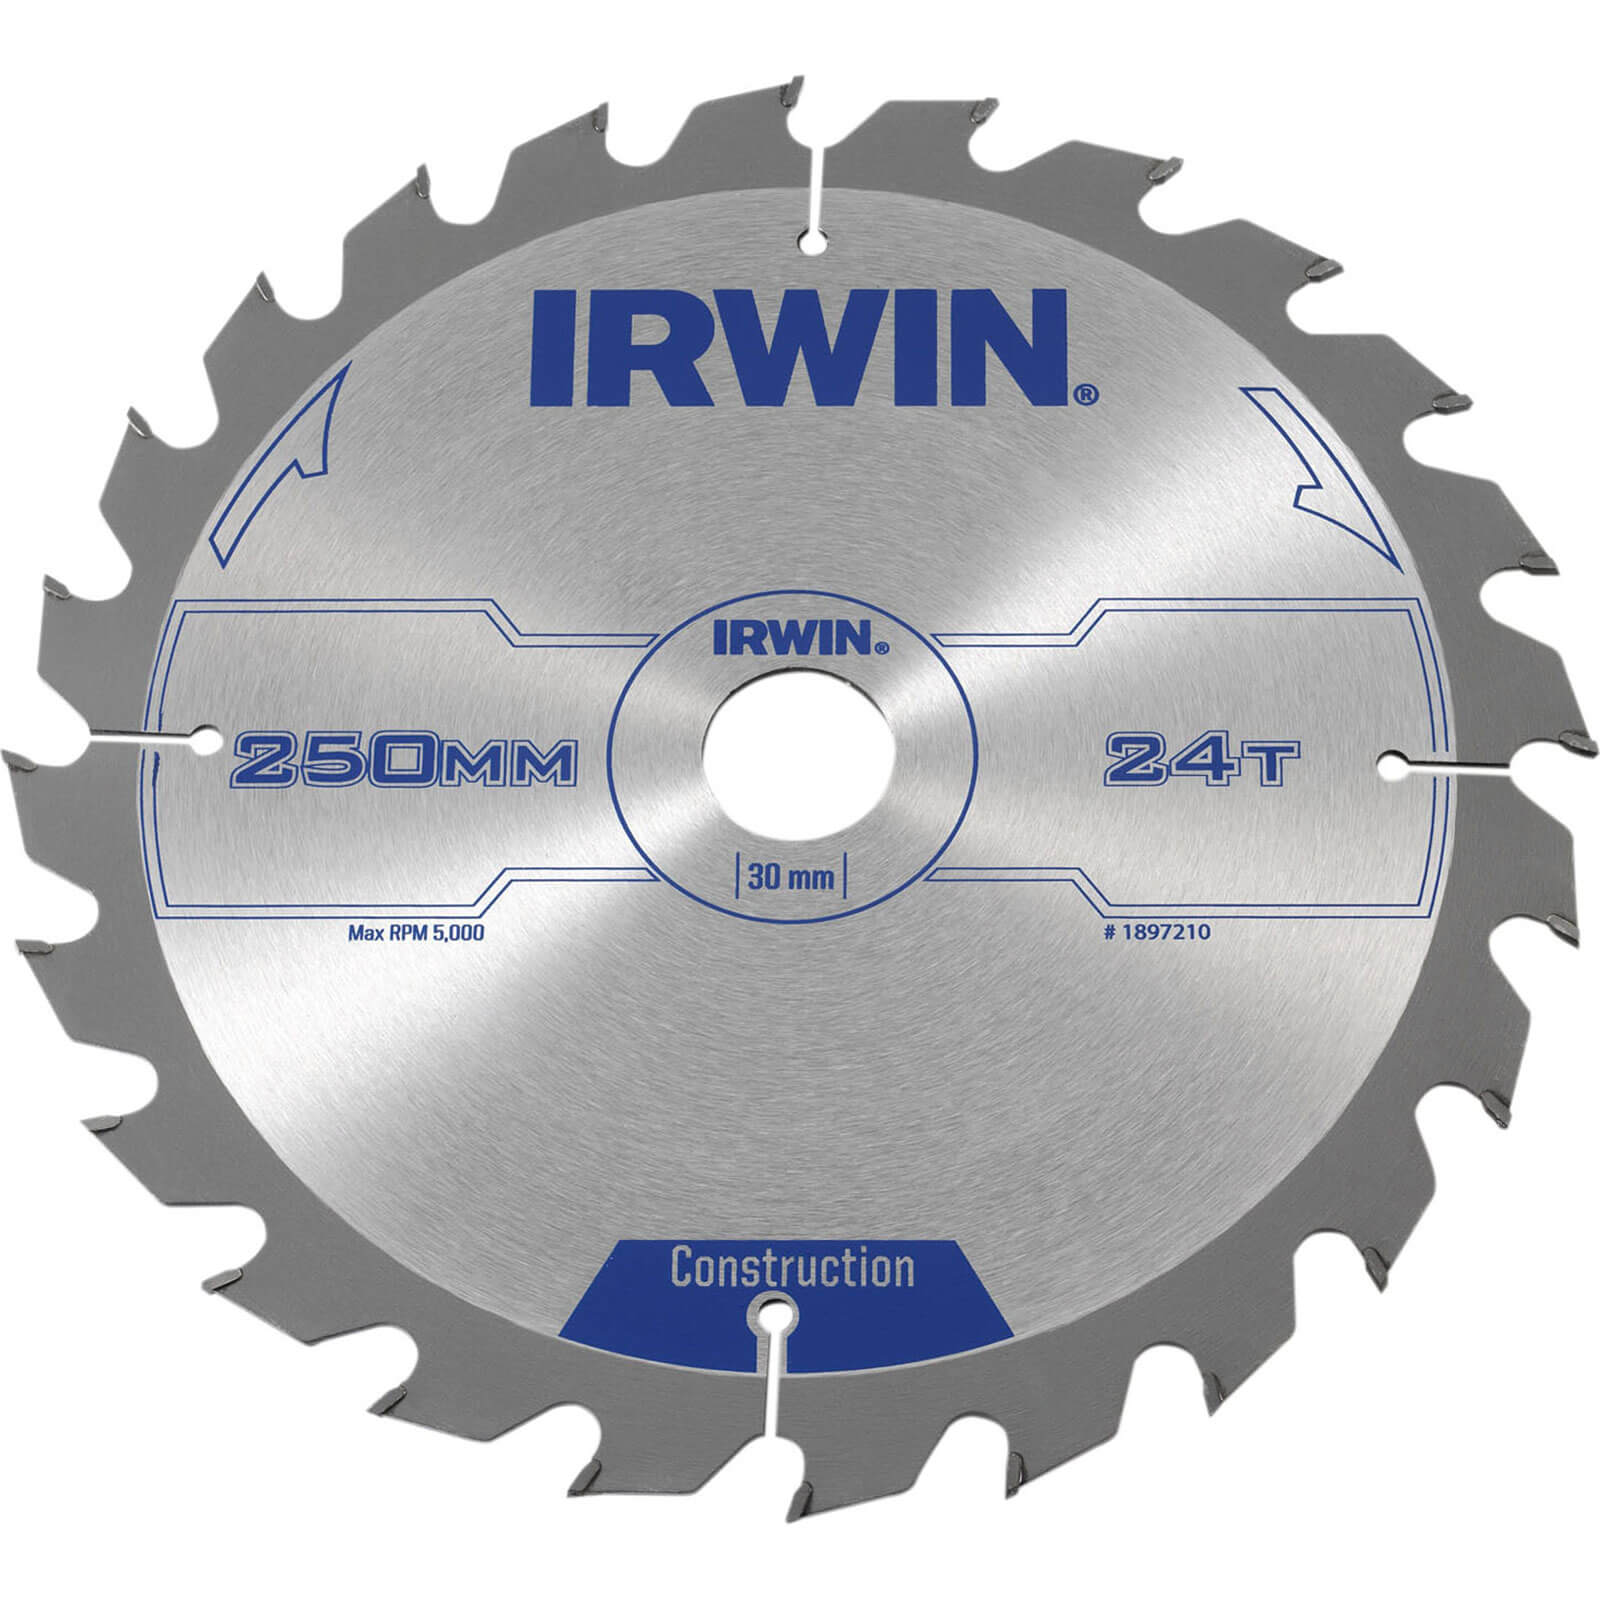 Photo of Irwin Atb Construction Circular Saw Blade 250mm 24t 30mm